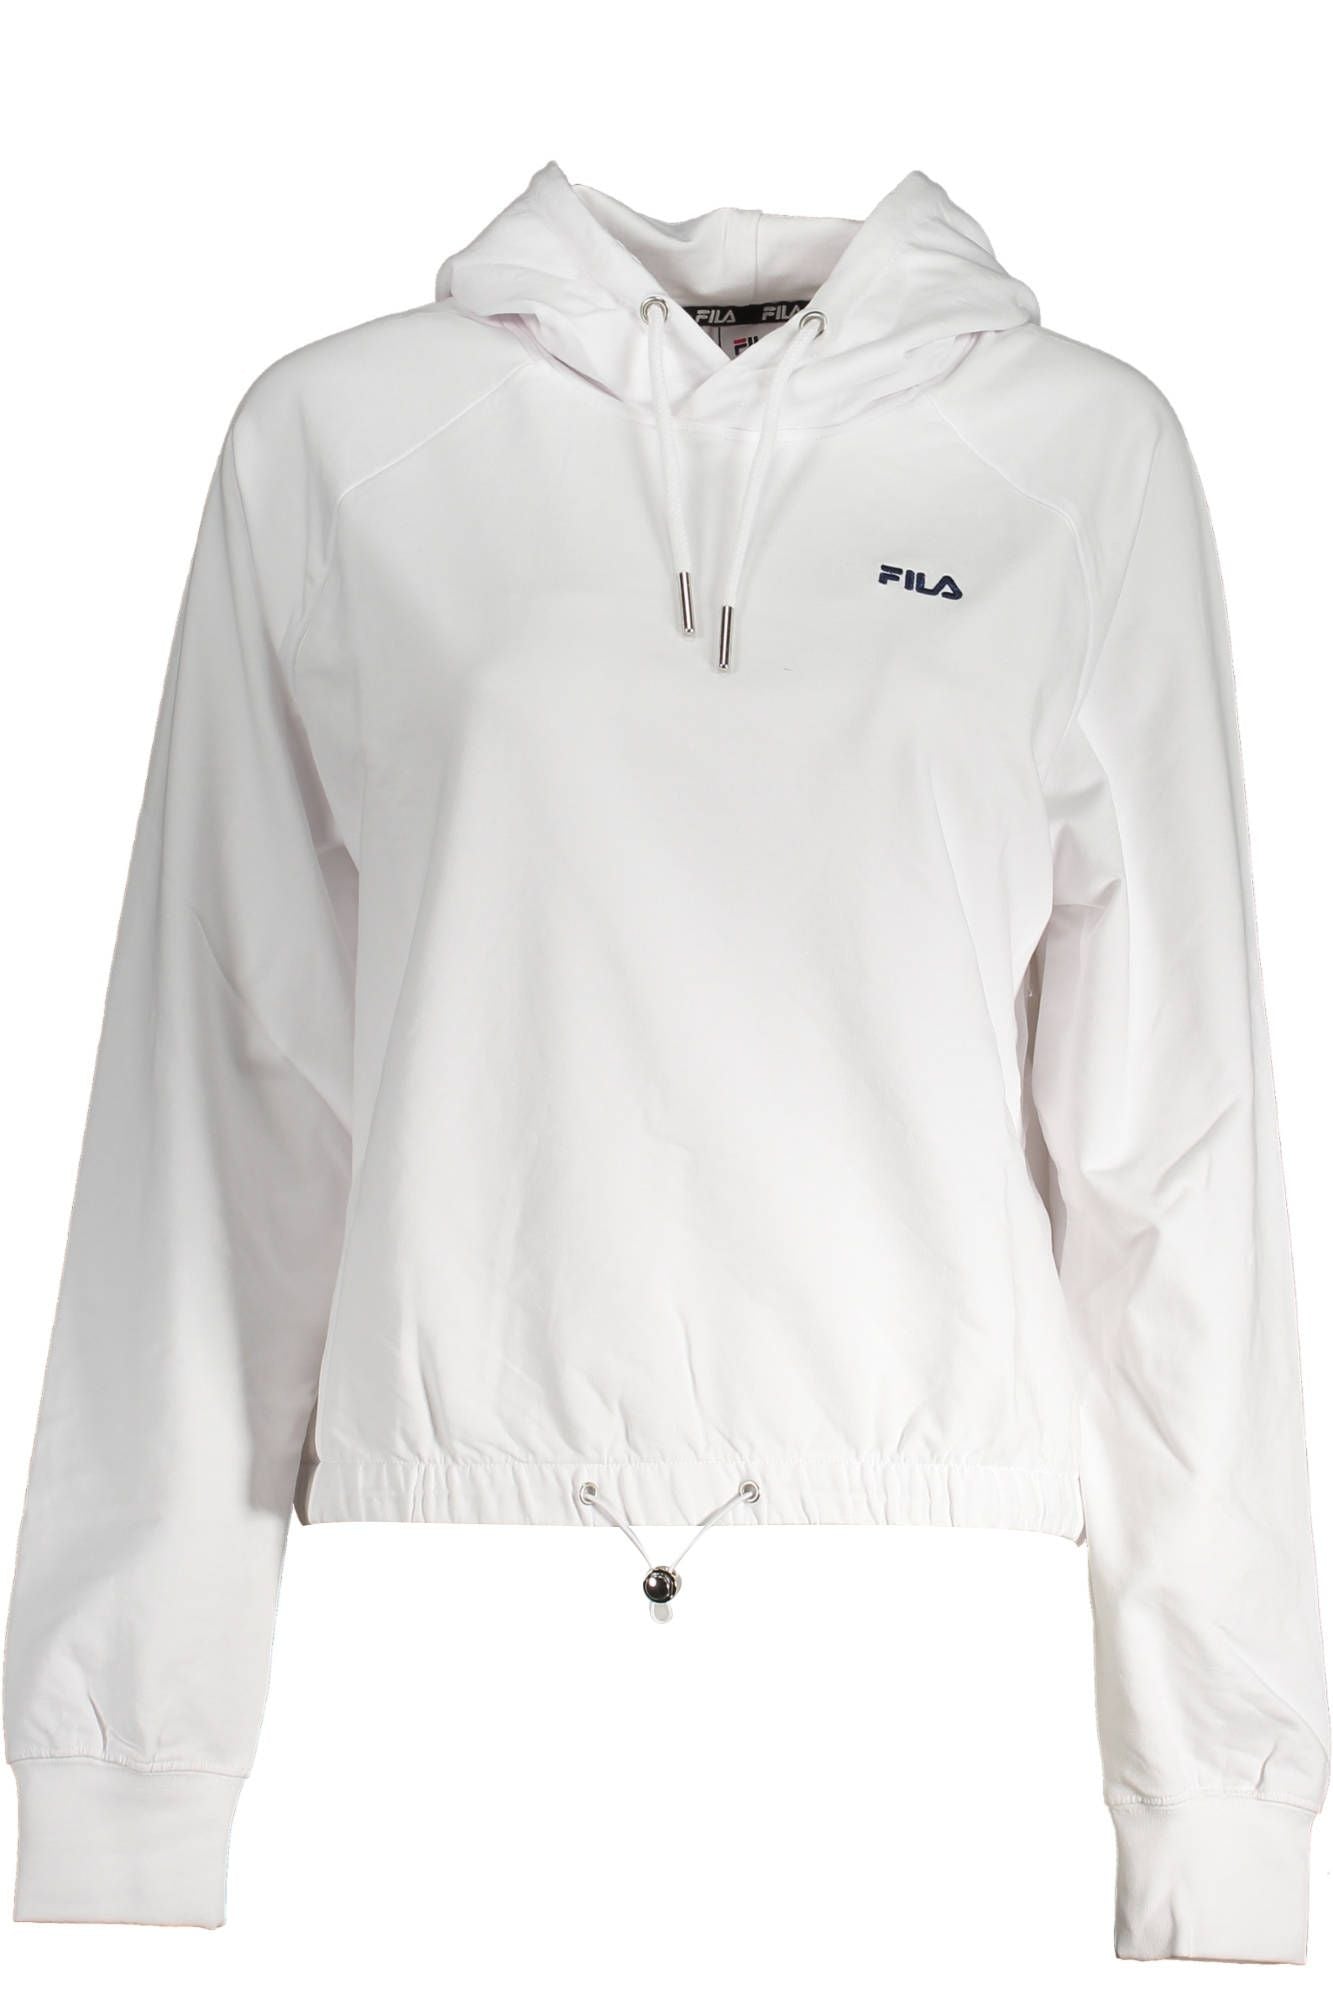 Classic White Hooded Sweatshirt with Embroidery